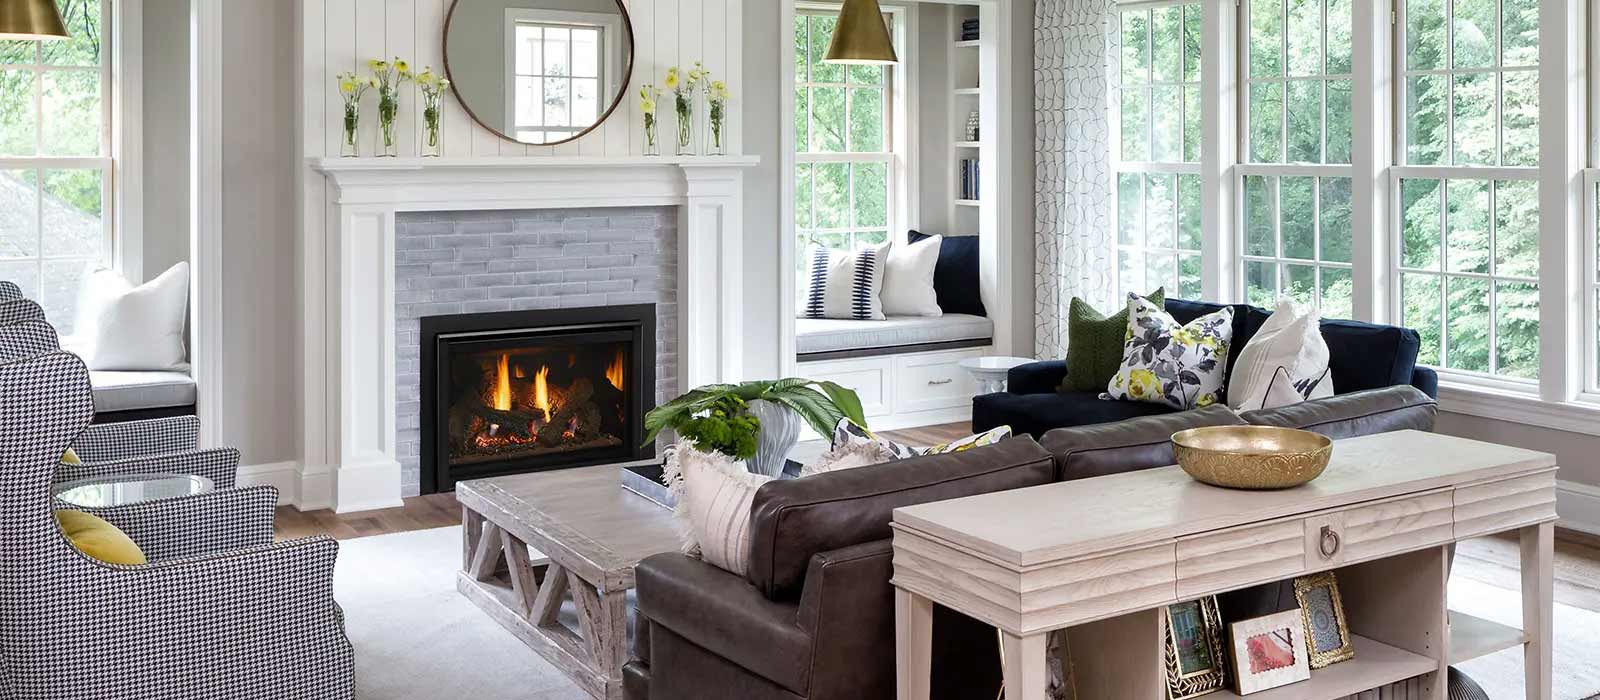 A cozy living room with a lit fire pit, surrounded by comfortable seating and large windows overlooking greenery. The decor includes a neutral color palette with floral accents.